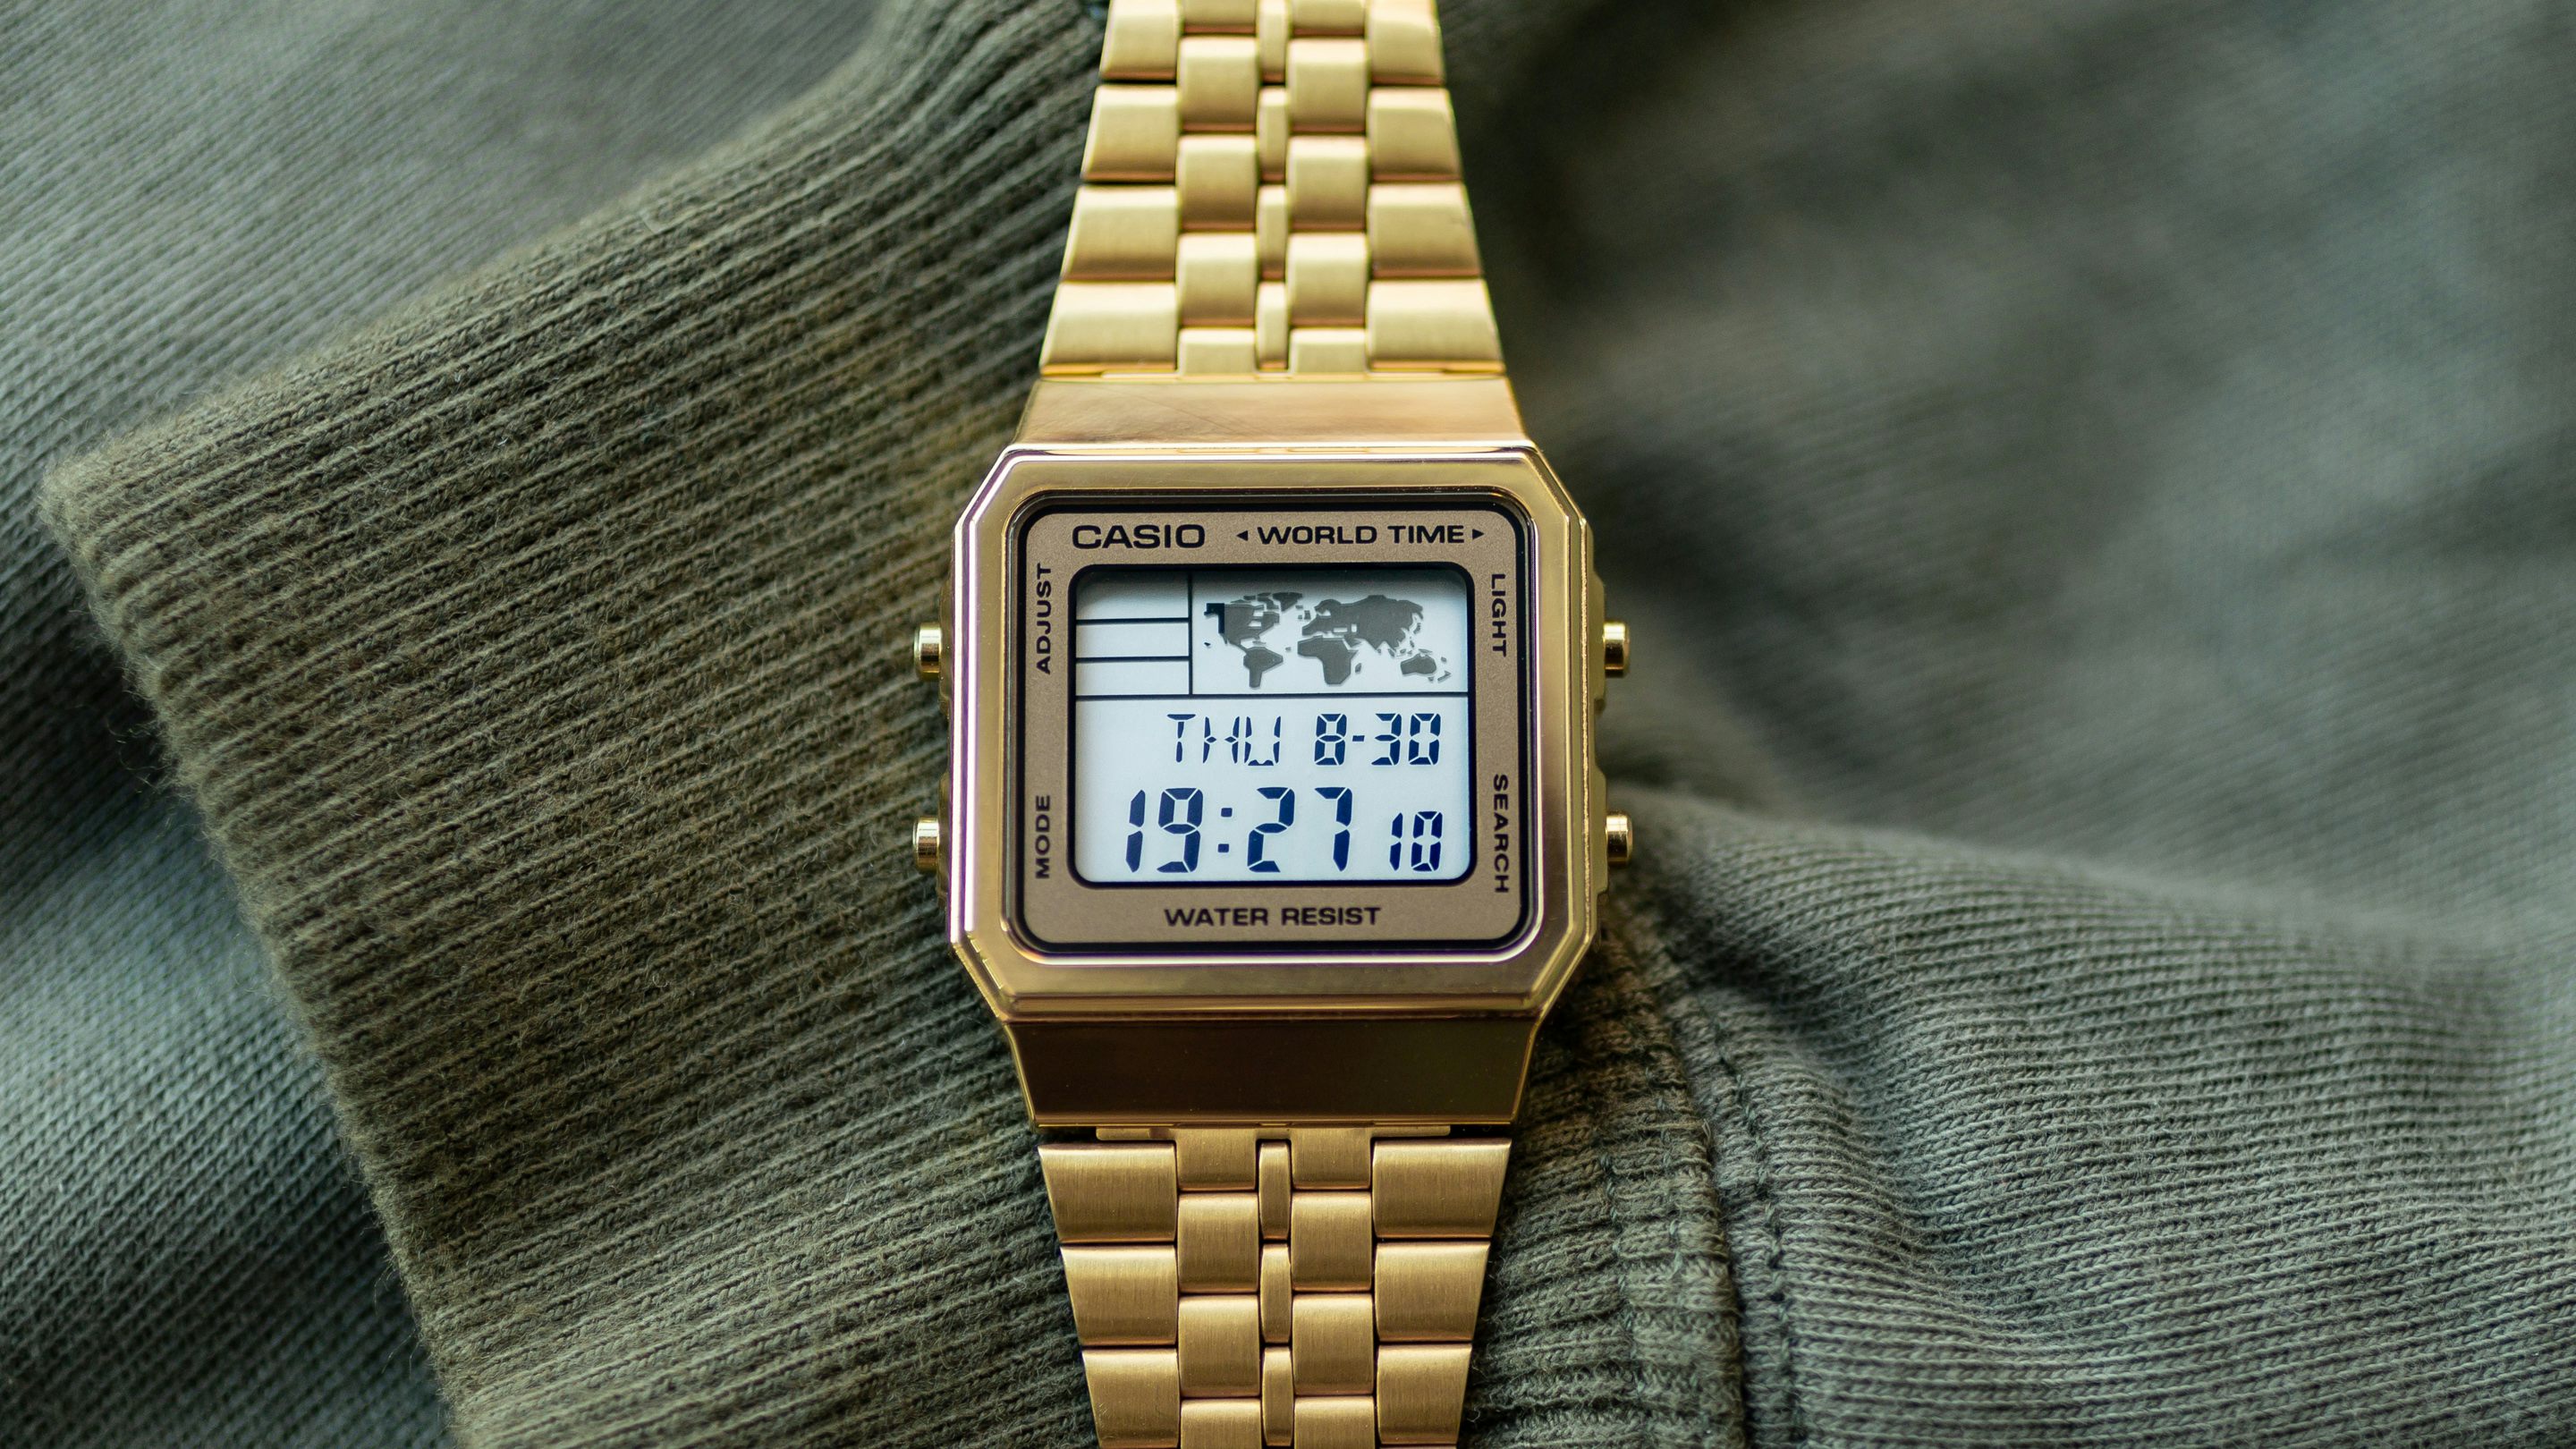 Hands-On: The 'Gold' Casio A500WGA-9DF World Timer - Hodinkee